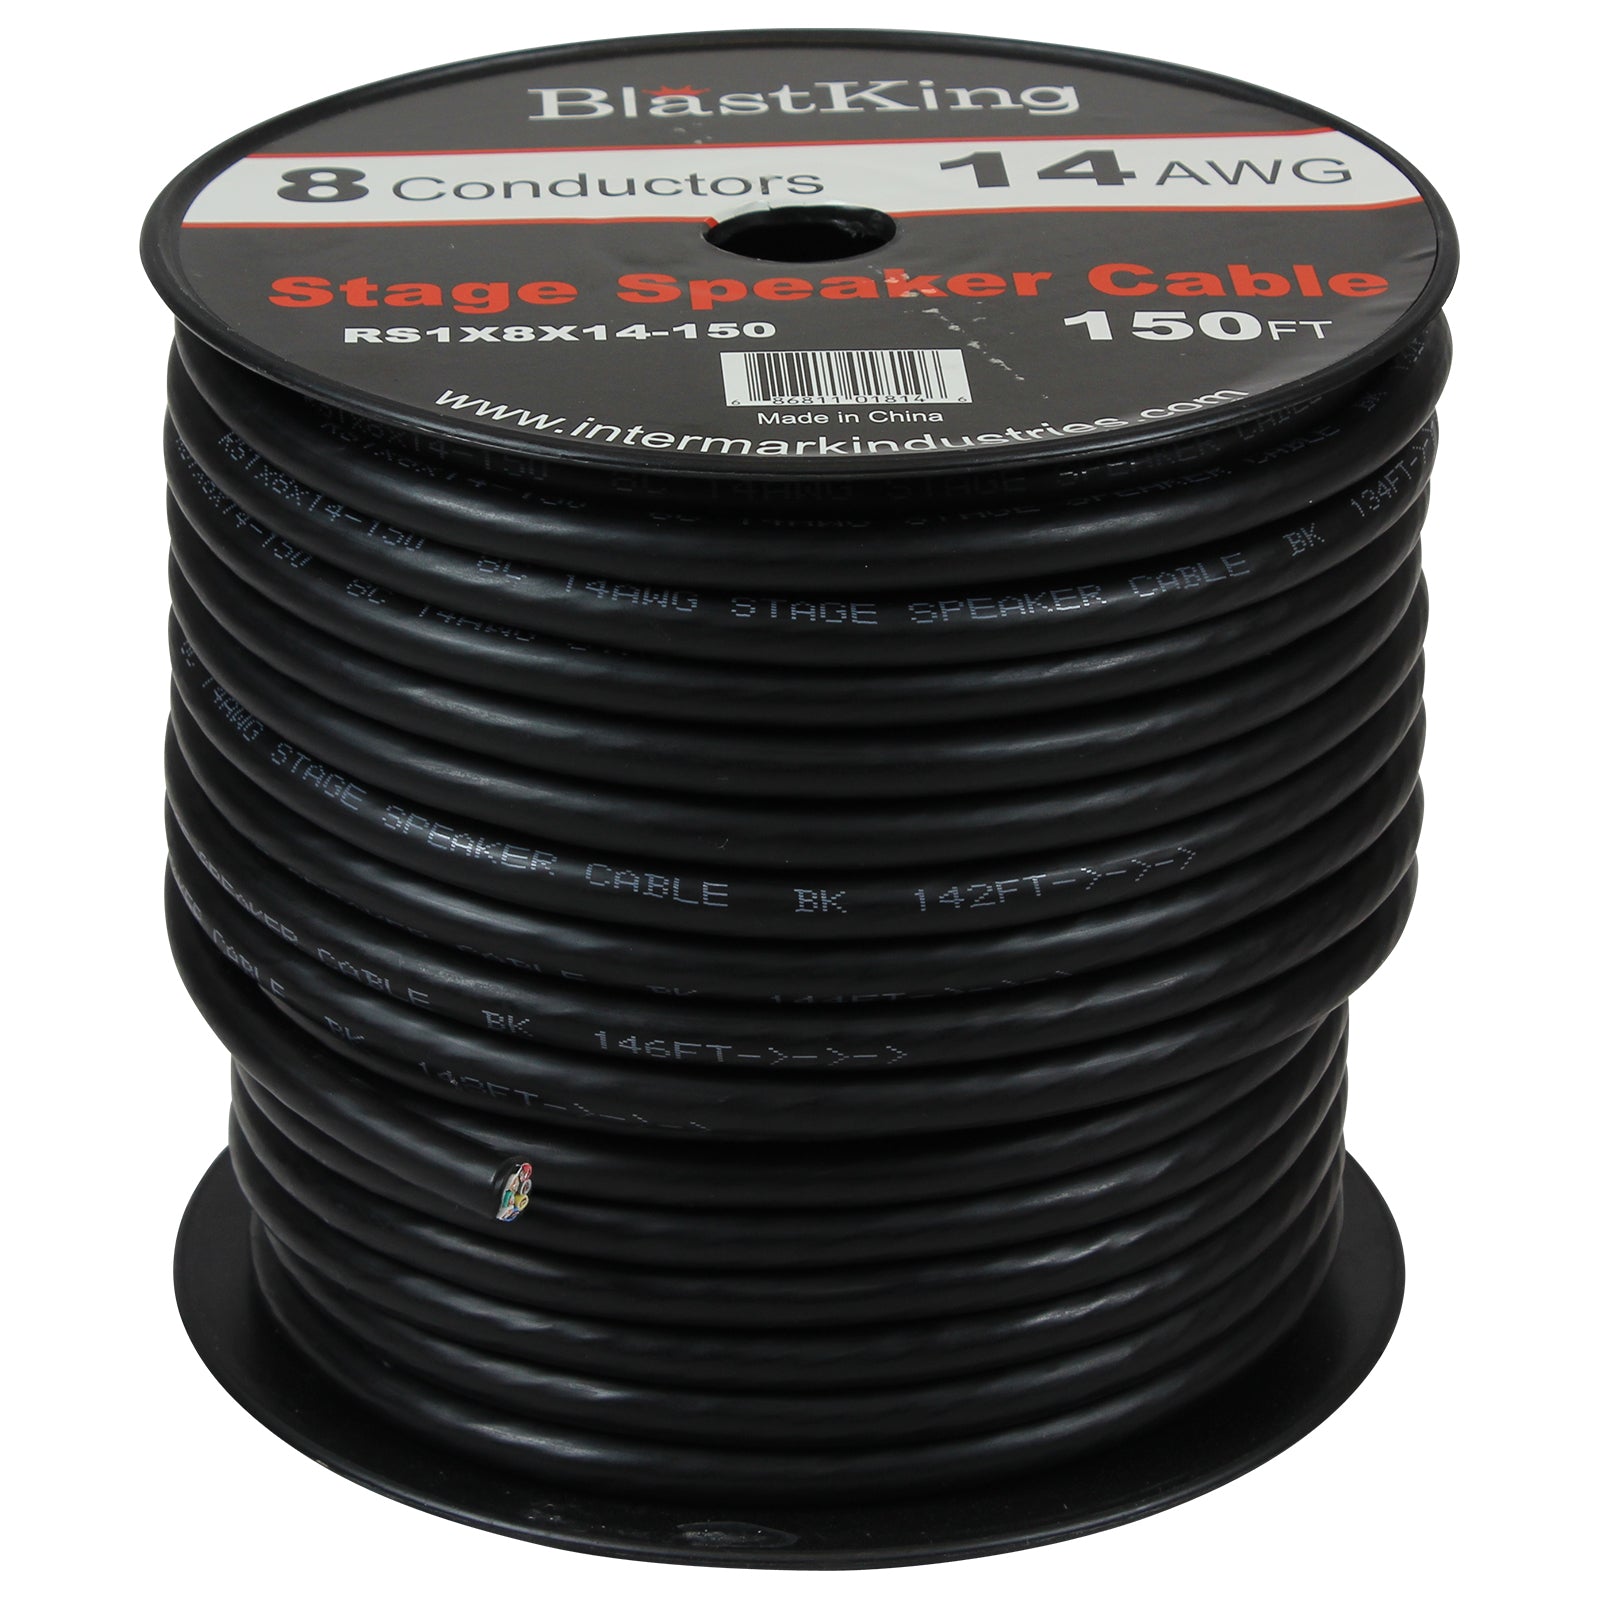 Blastking RS1X8X14-150 14 AWG 8-Conductor Speaker Cable 150 Ft